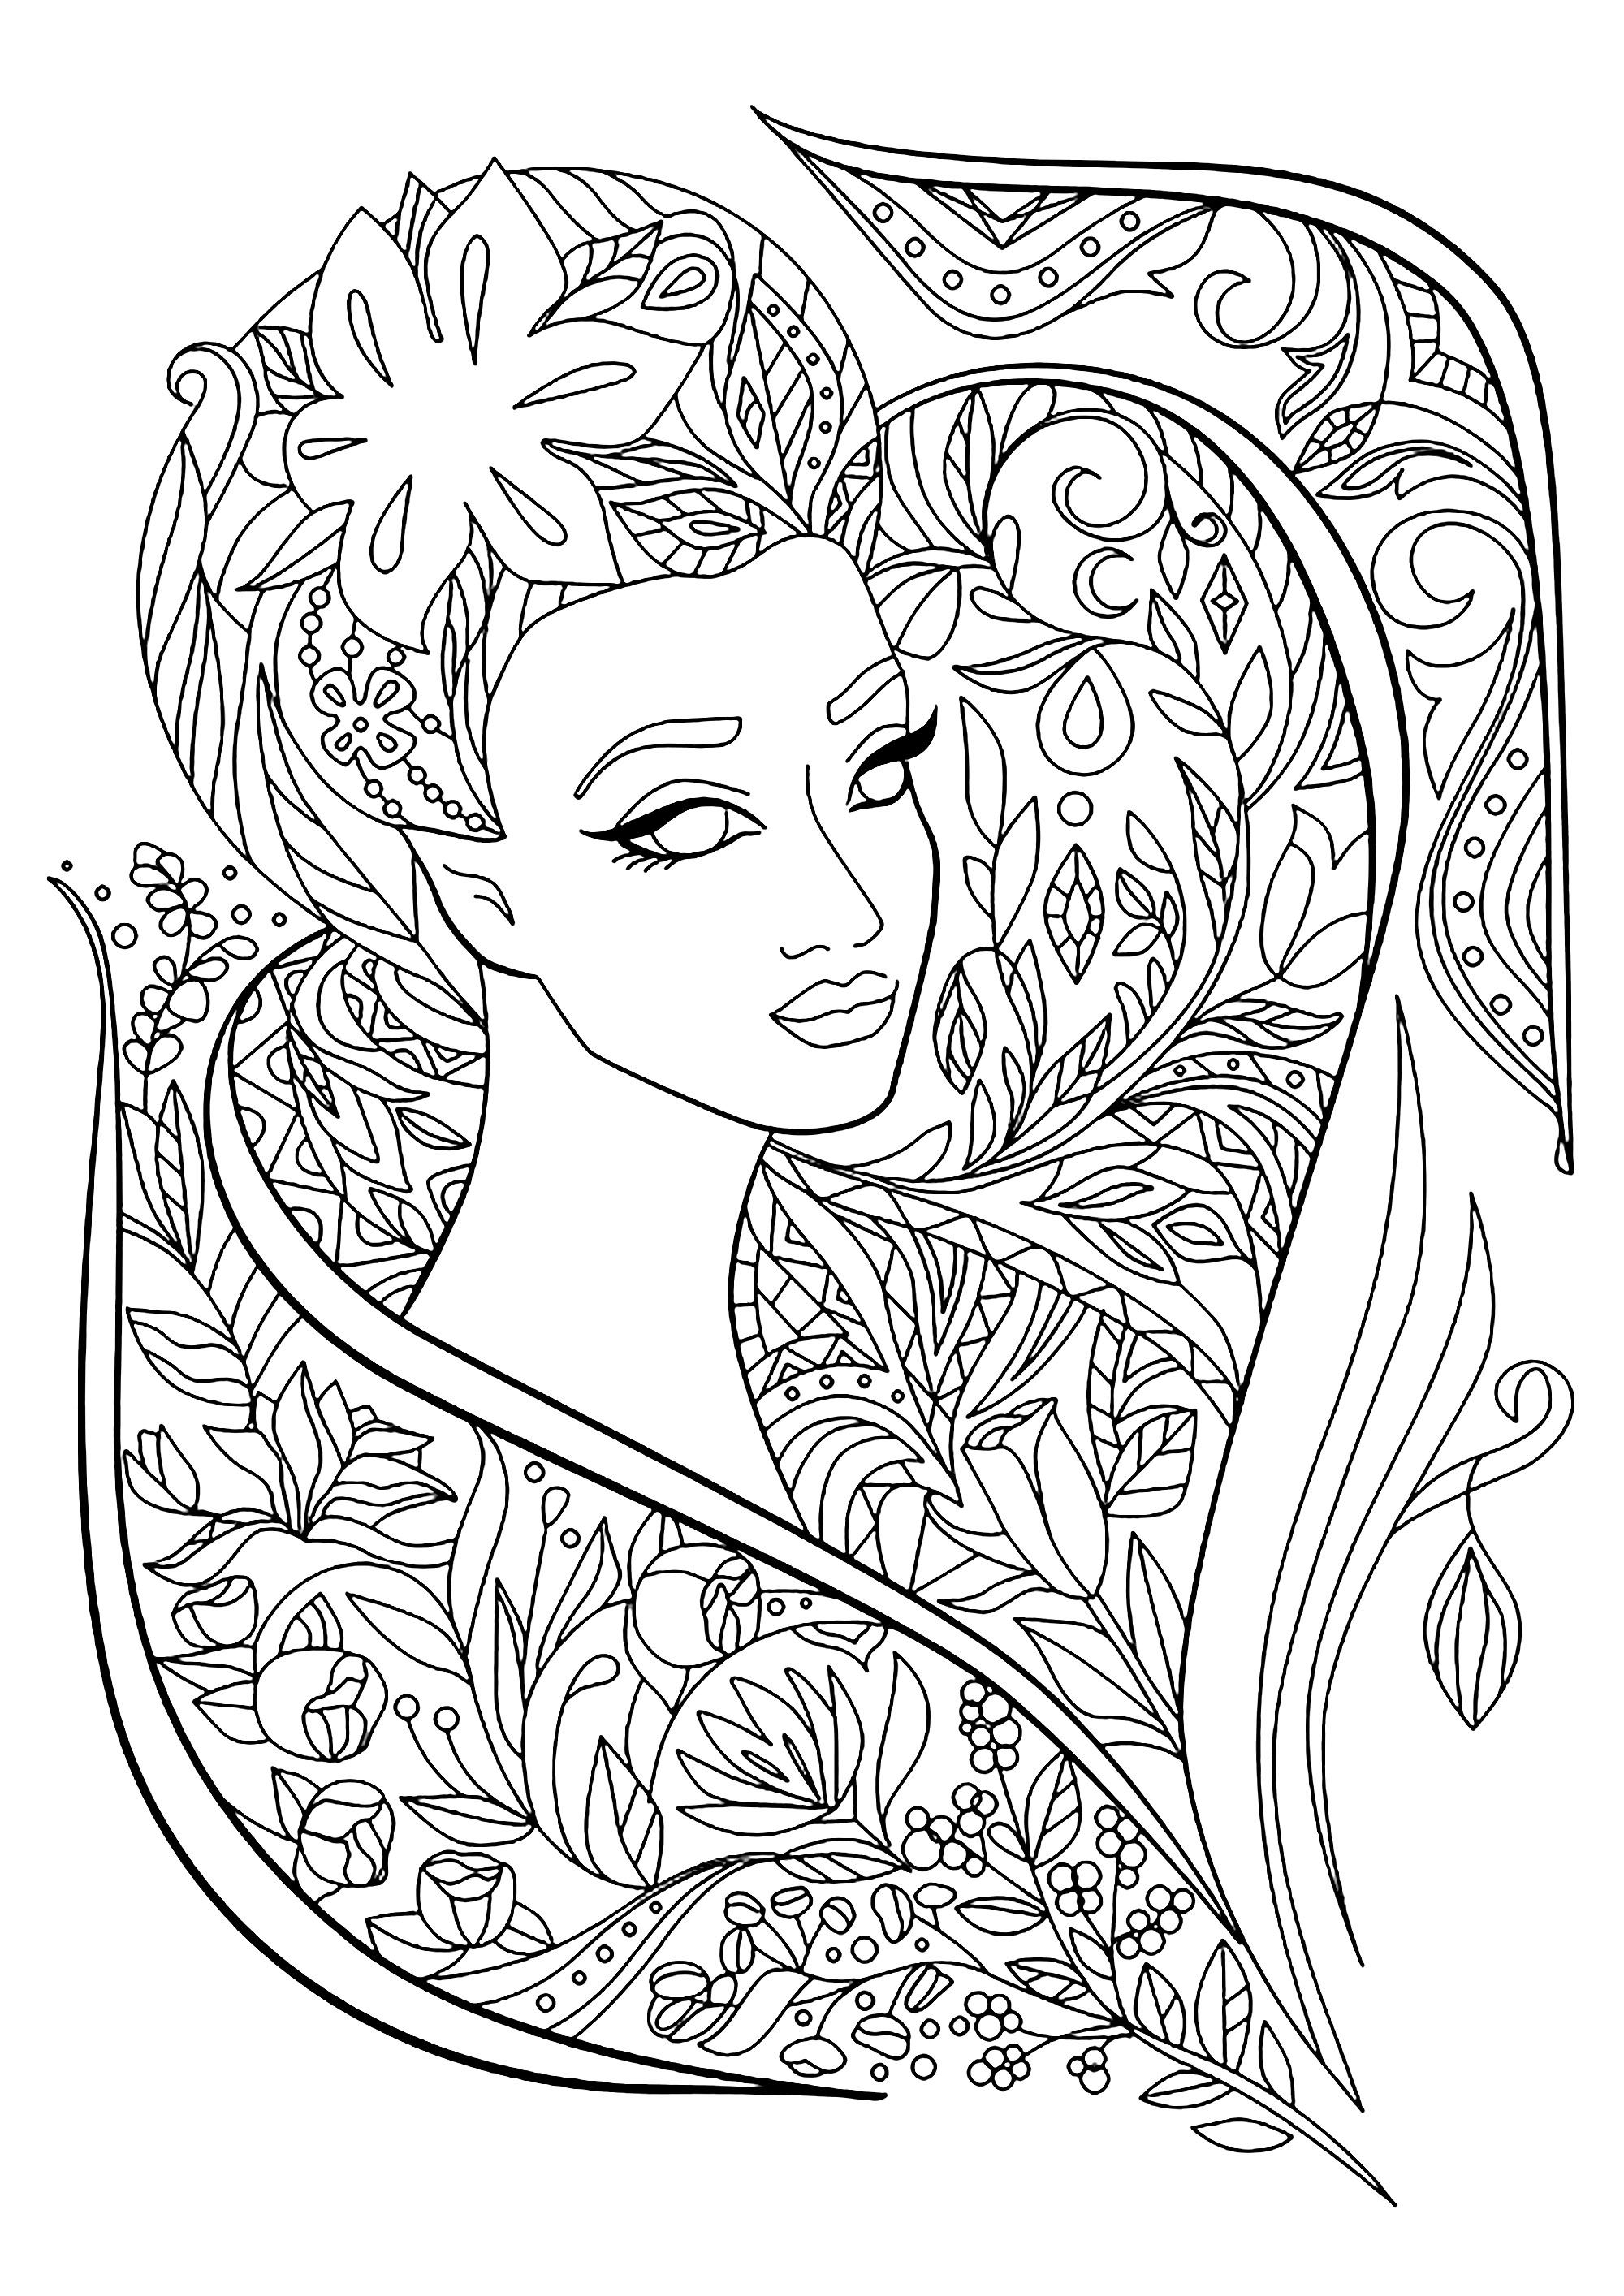 Woman face with beautiful flowers and leaves to color, Artist : Navada   Source : 123rf